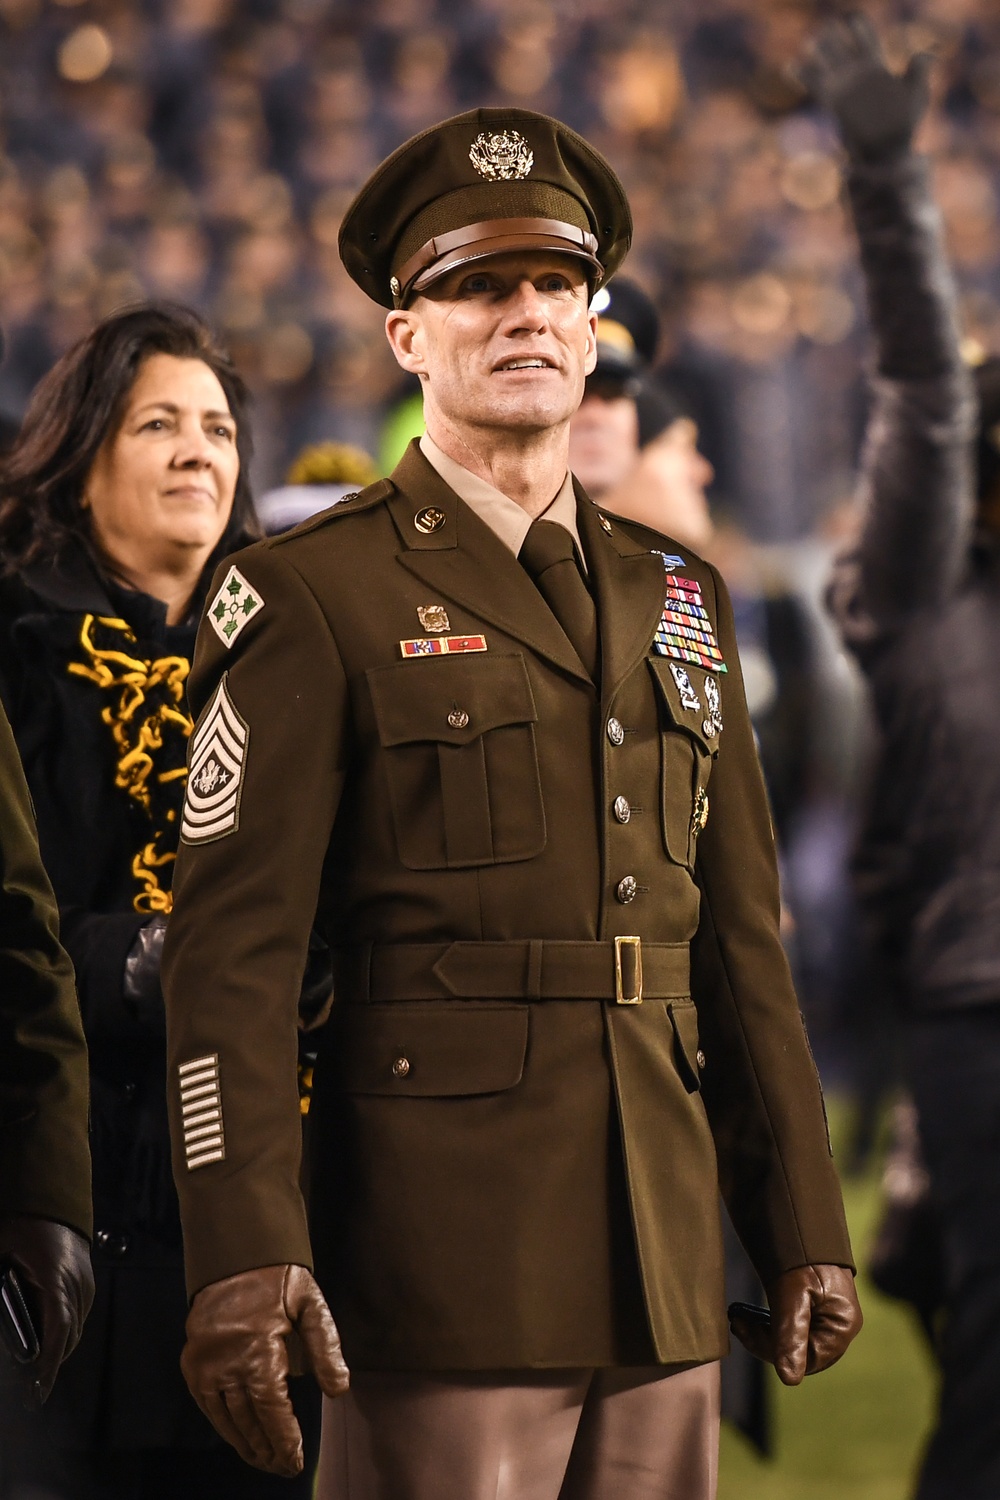 DVIDS - Images - 2018 Army-Navy Game [Image 12 of 14]